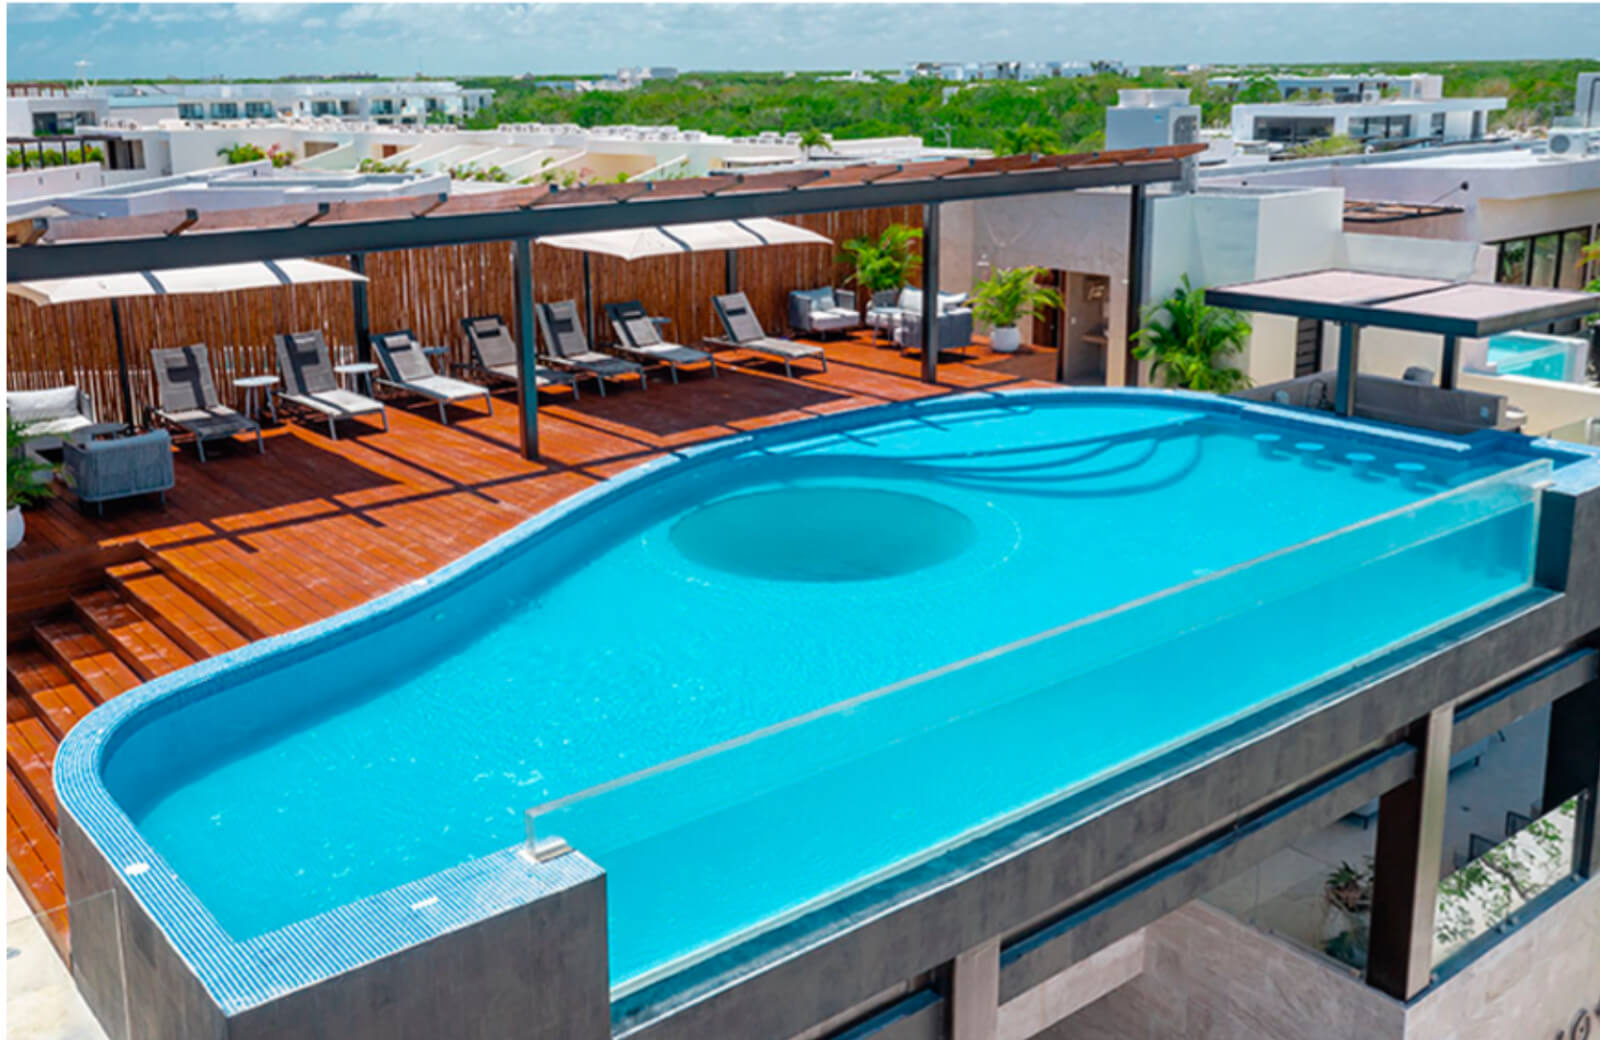 Condominium with pool for adults and rooftop bar, family pool, spa, co-working, gym, for pre-sale, Aldea Zama, Tulum.